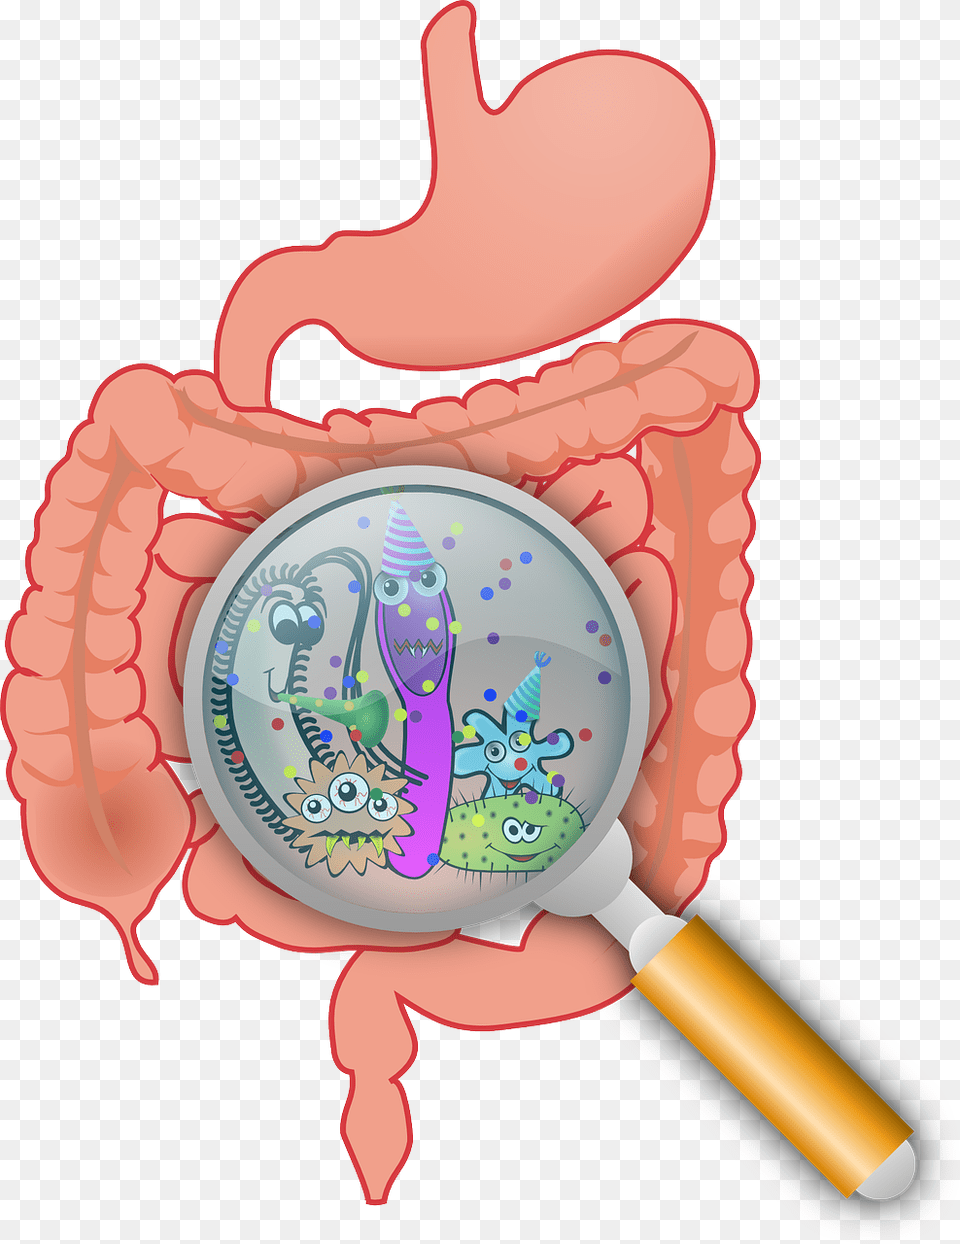 Cancer In The Digestive System Pearlpoint Nutrition Services, Food, Ketchup, Magnifying Free Png